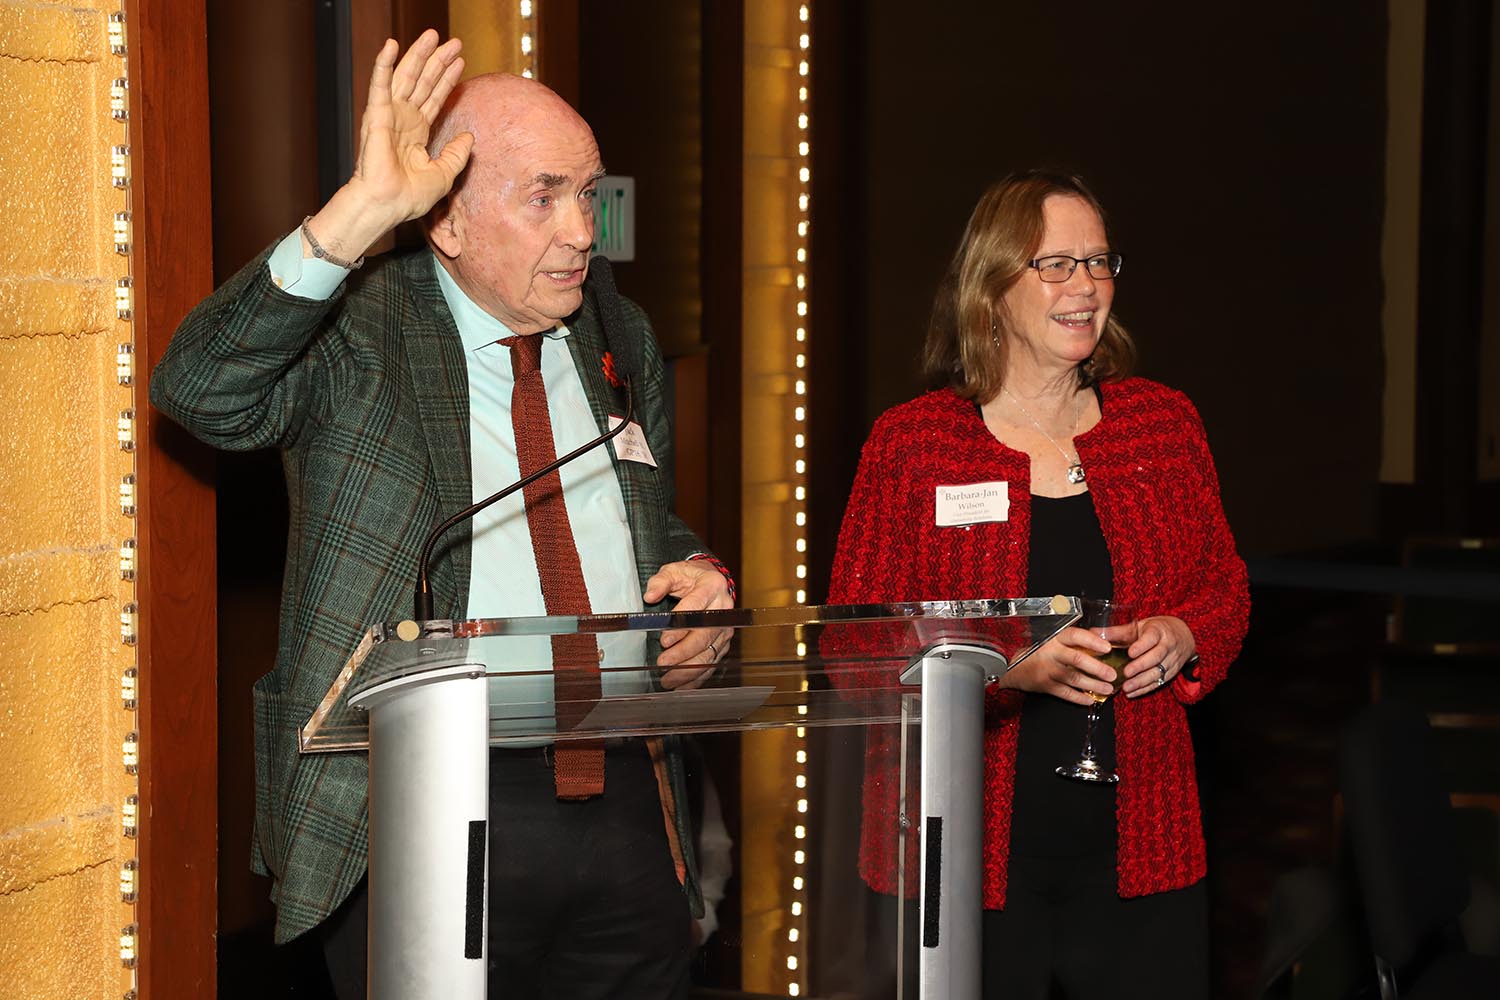 Jack Mitchell '61 gave a toast to Barbara-Jan Wilson, special advisor to the president, who in December retired as long-time vice president for University Relations.